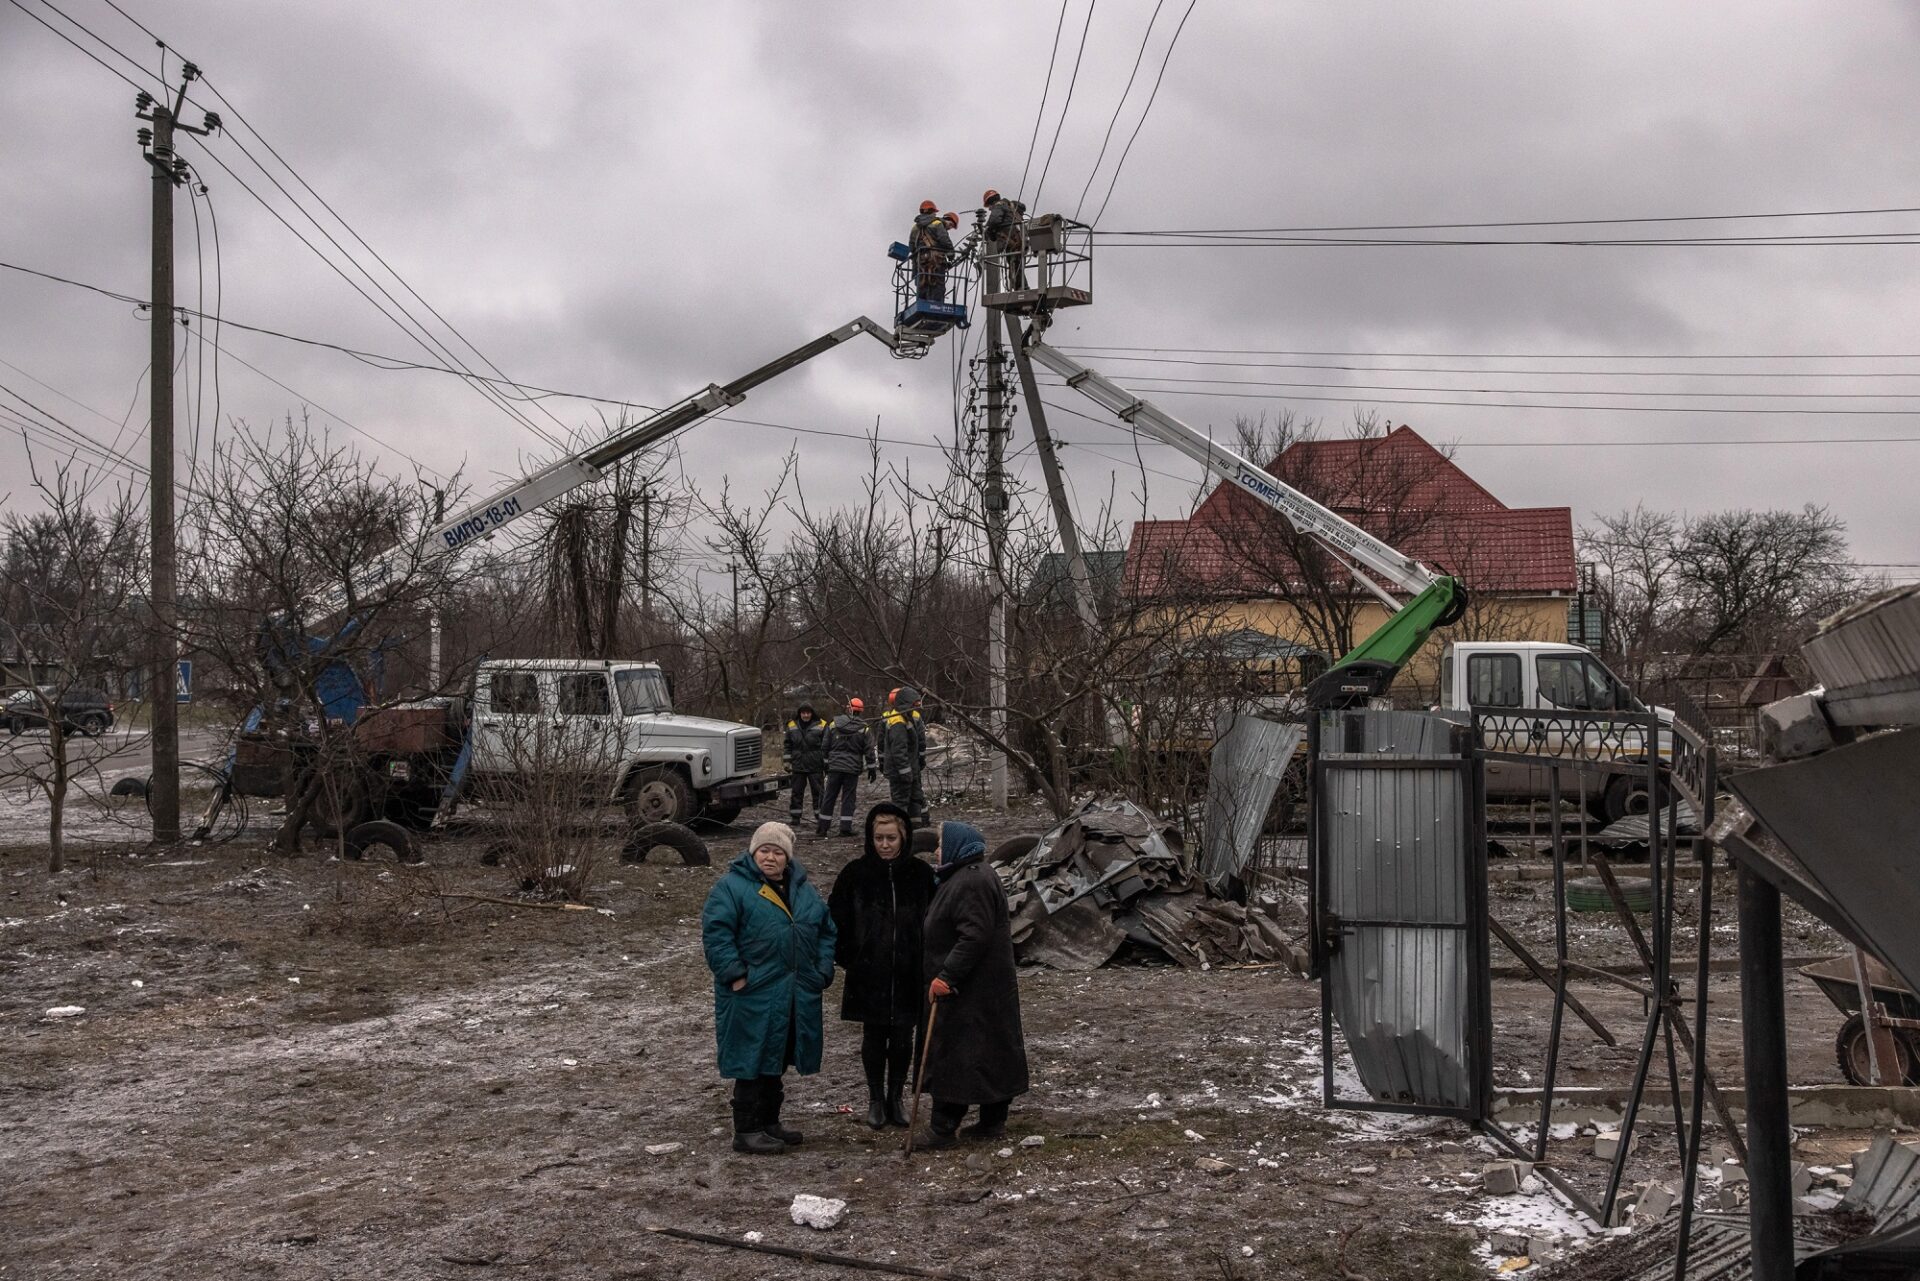 Ukraine is grappling with a severe energy crisis as energy consumption reached a record high yesterday, putting immense strain on the fragile energy sector